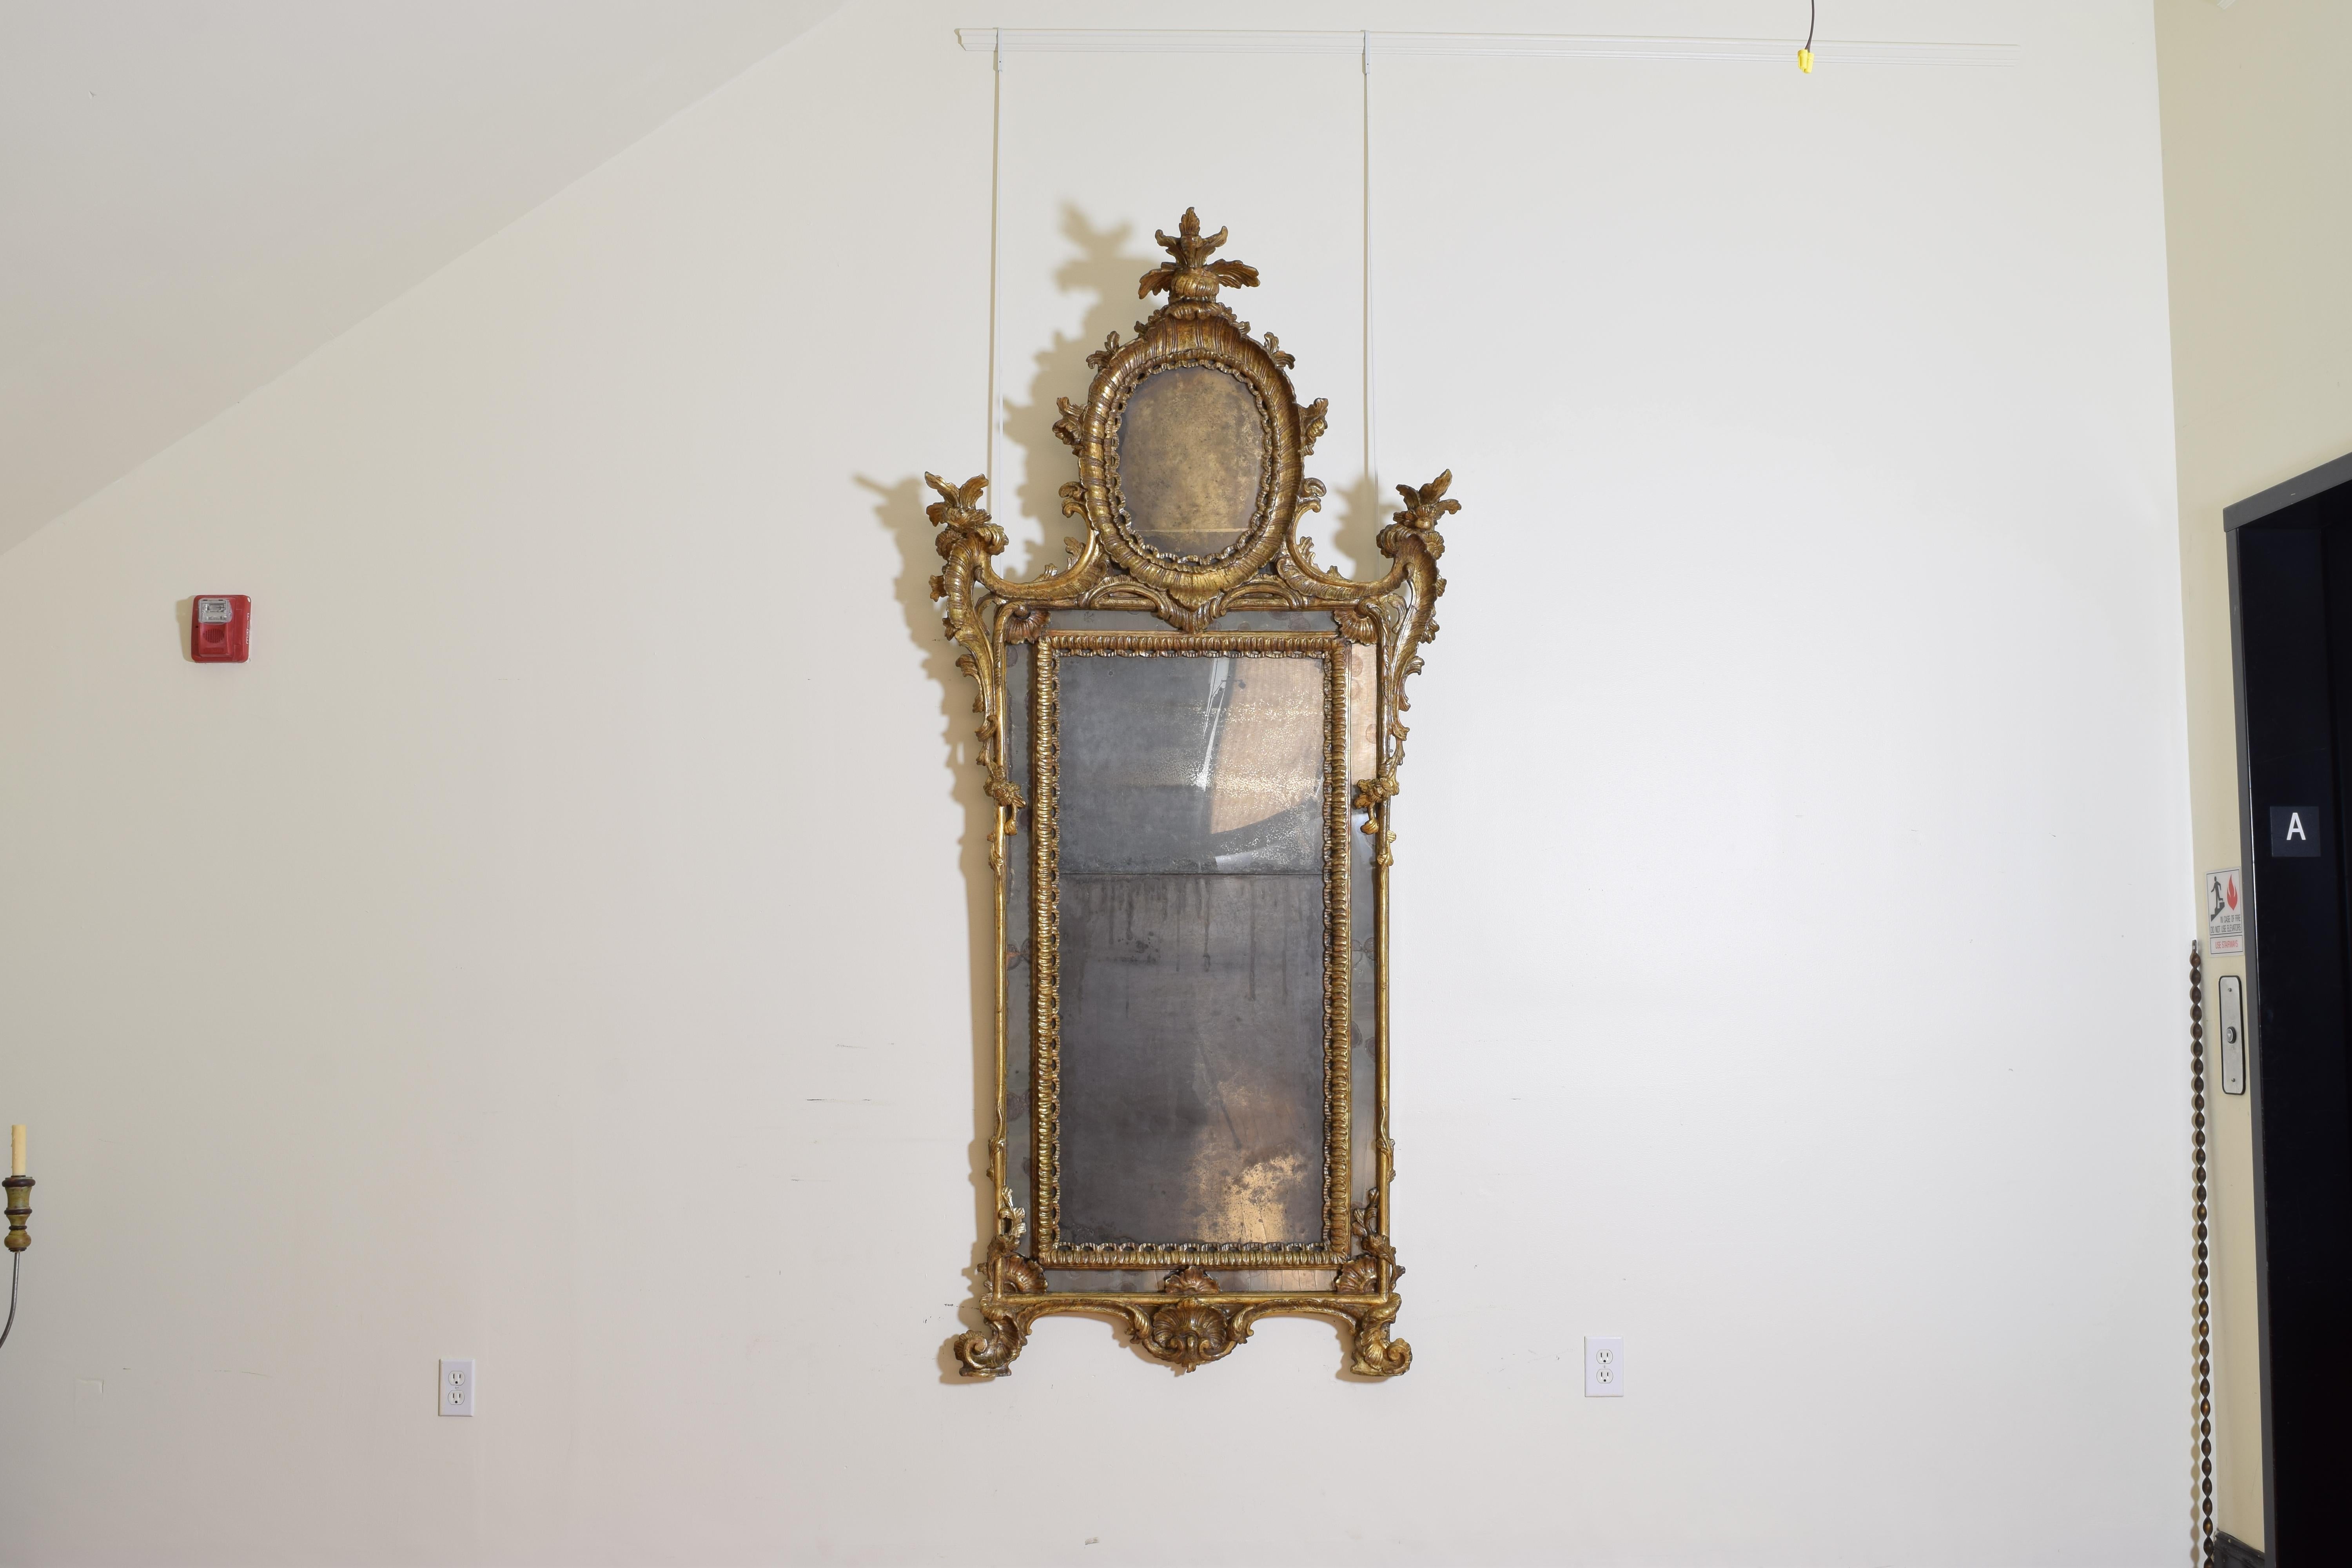 this grand and important mirror was carved and decorated in the Rococo style from the early 2nd quarter of the 18th century, it retains its original mirrorplates and backing, the word Rococo is derived from the French word rocaille, which denoted